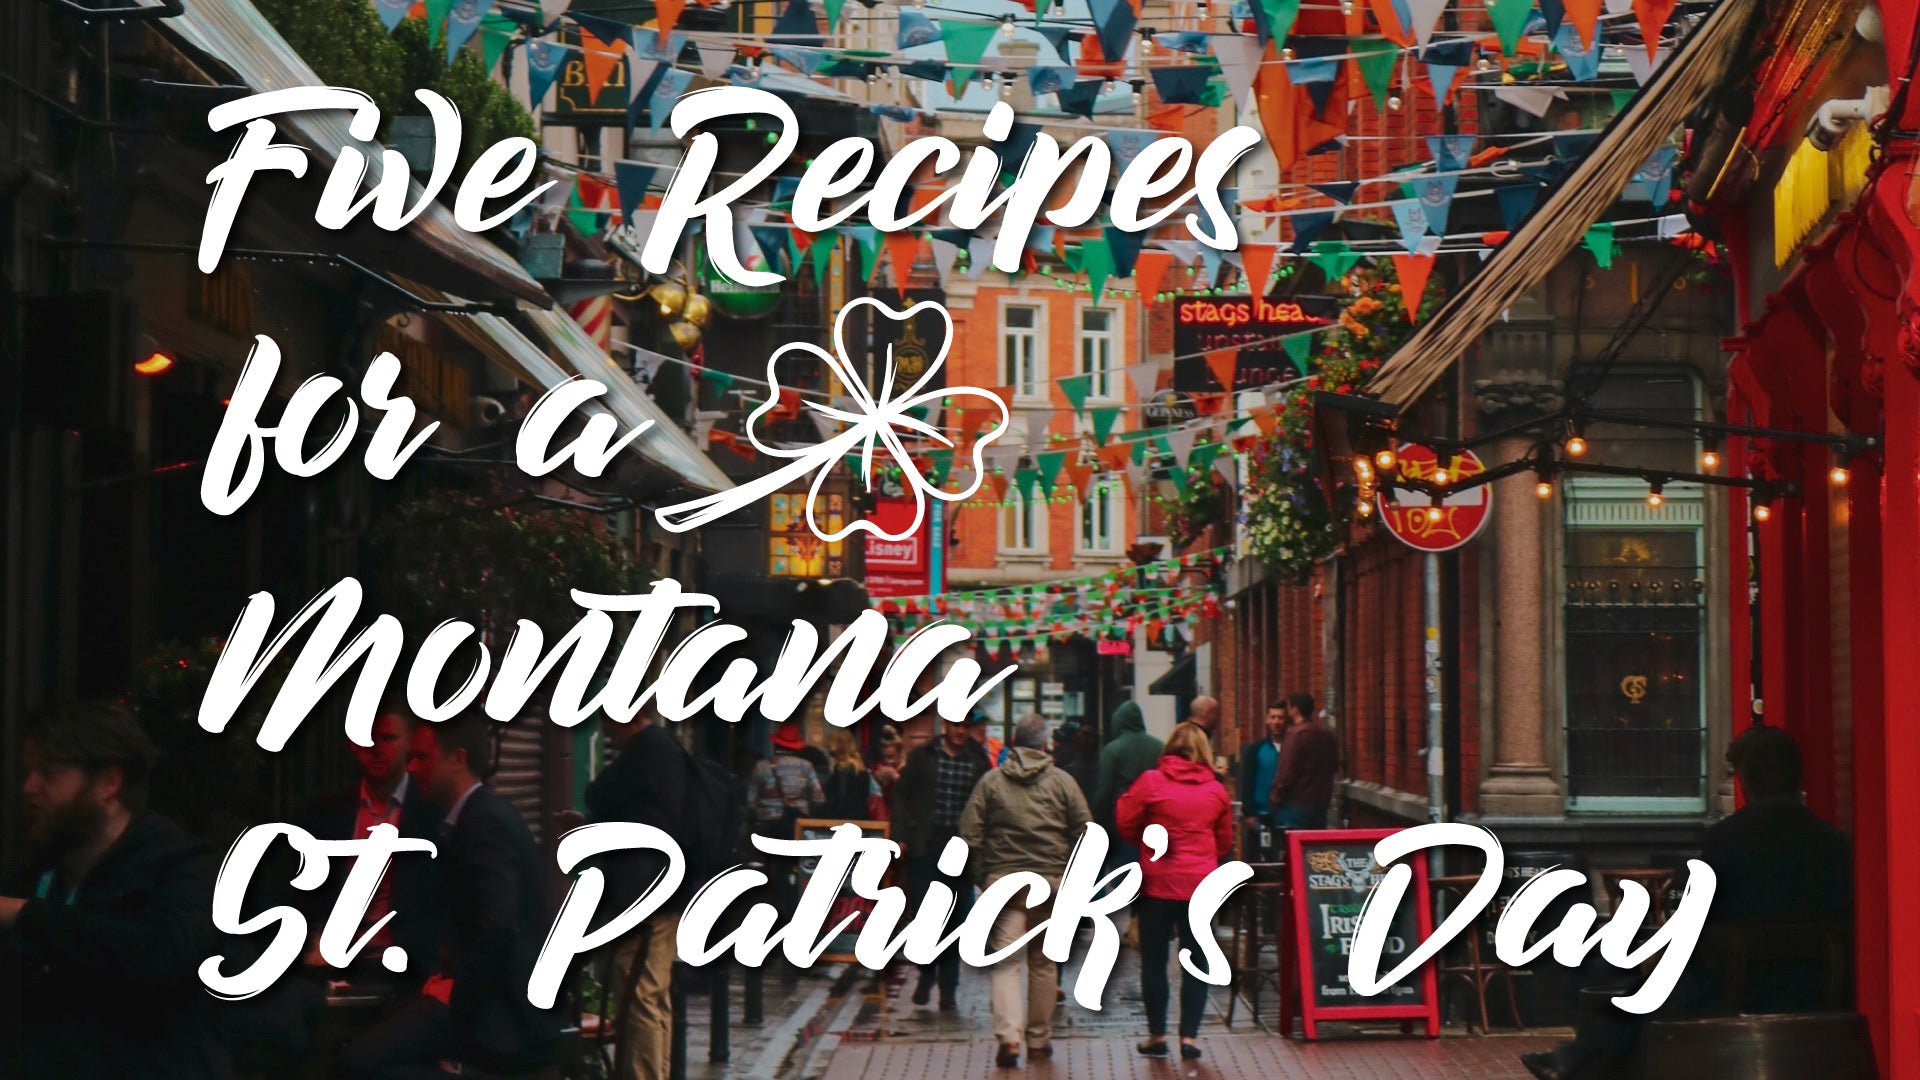 5 Recipes for a Montana St. Paddy's